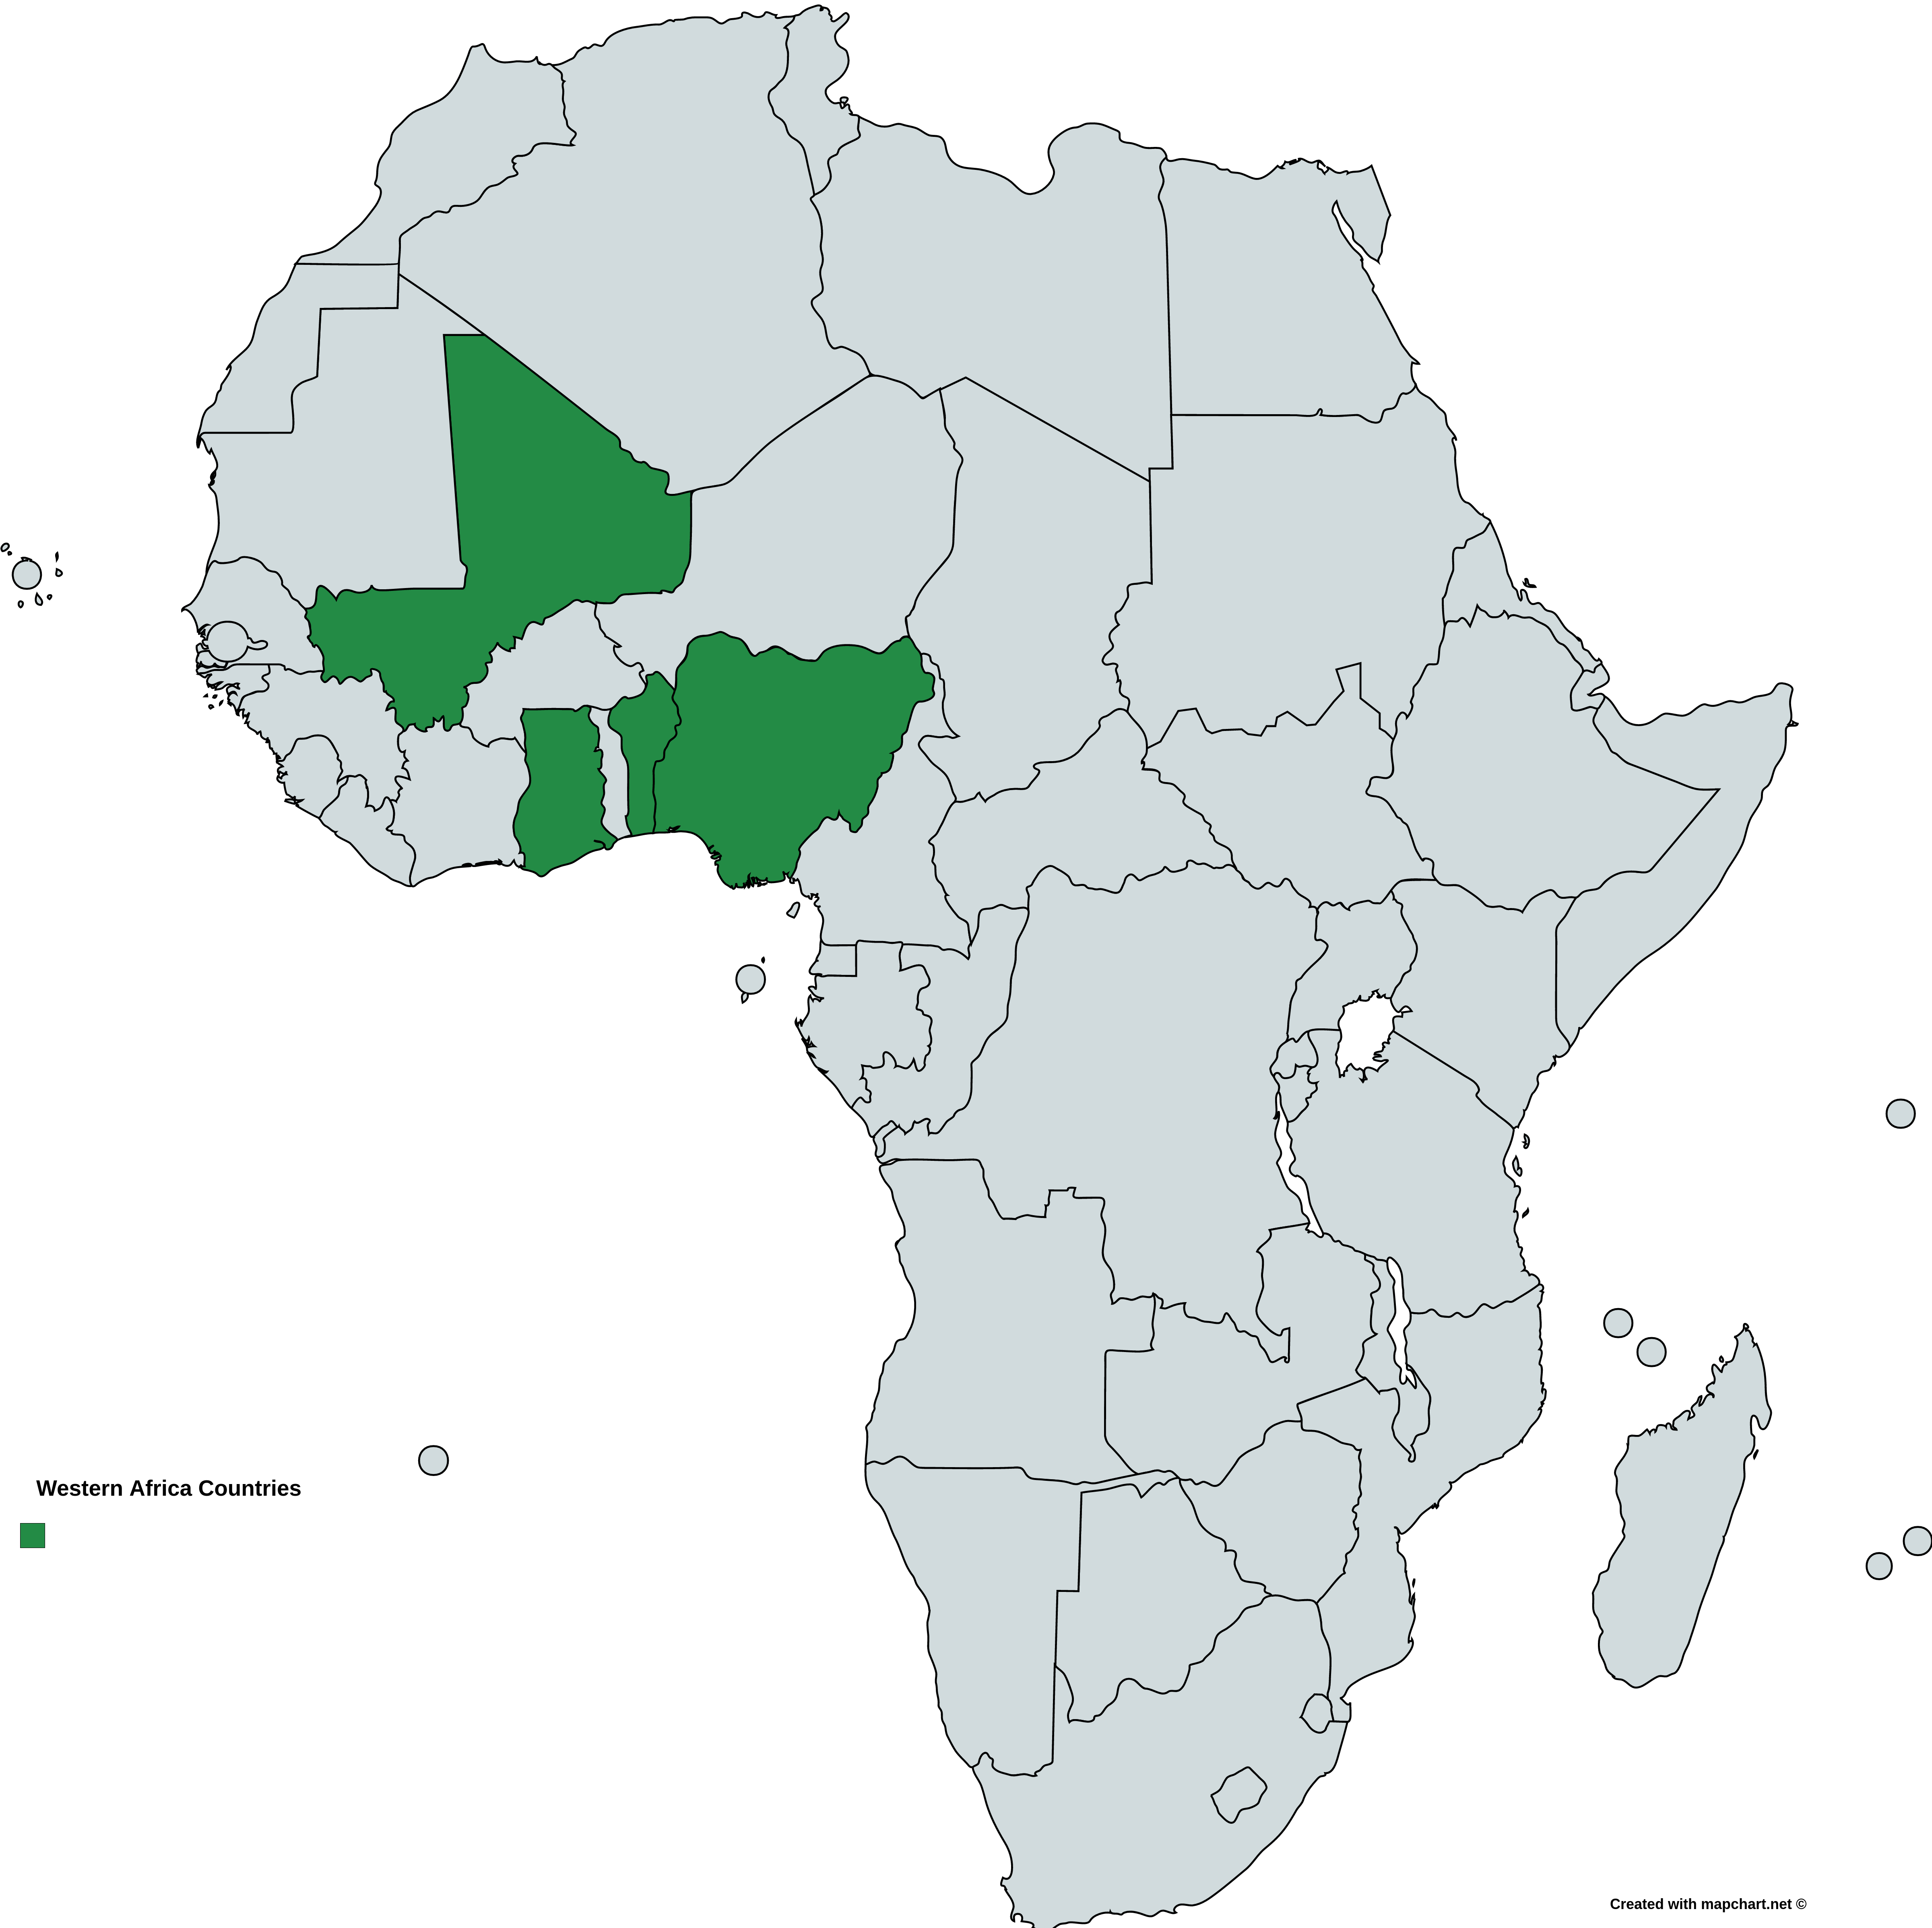 STMA locations in Western Africa